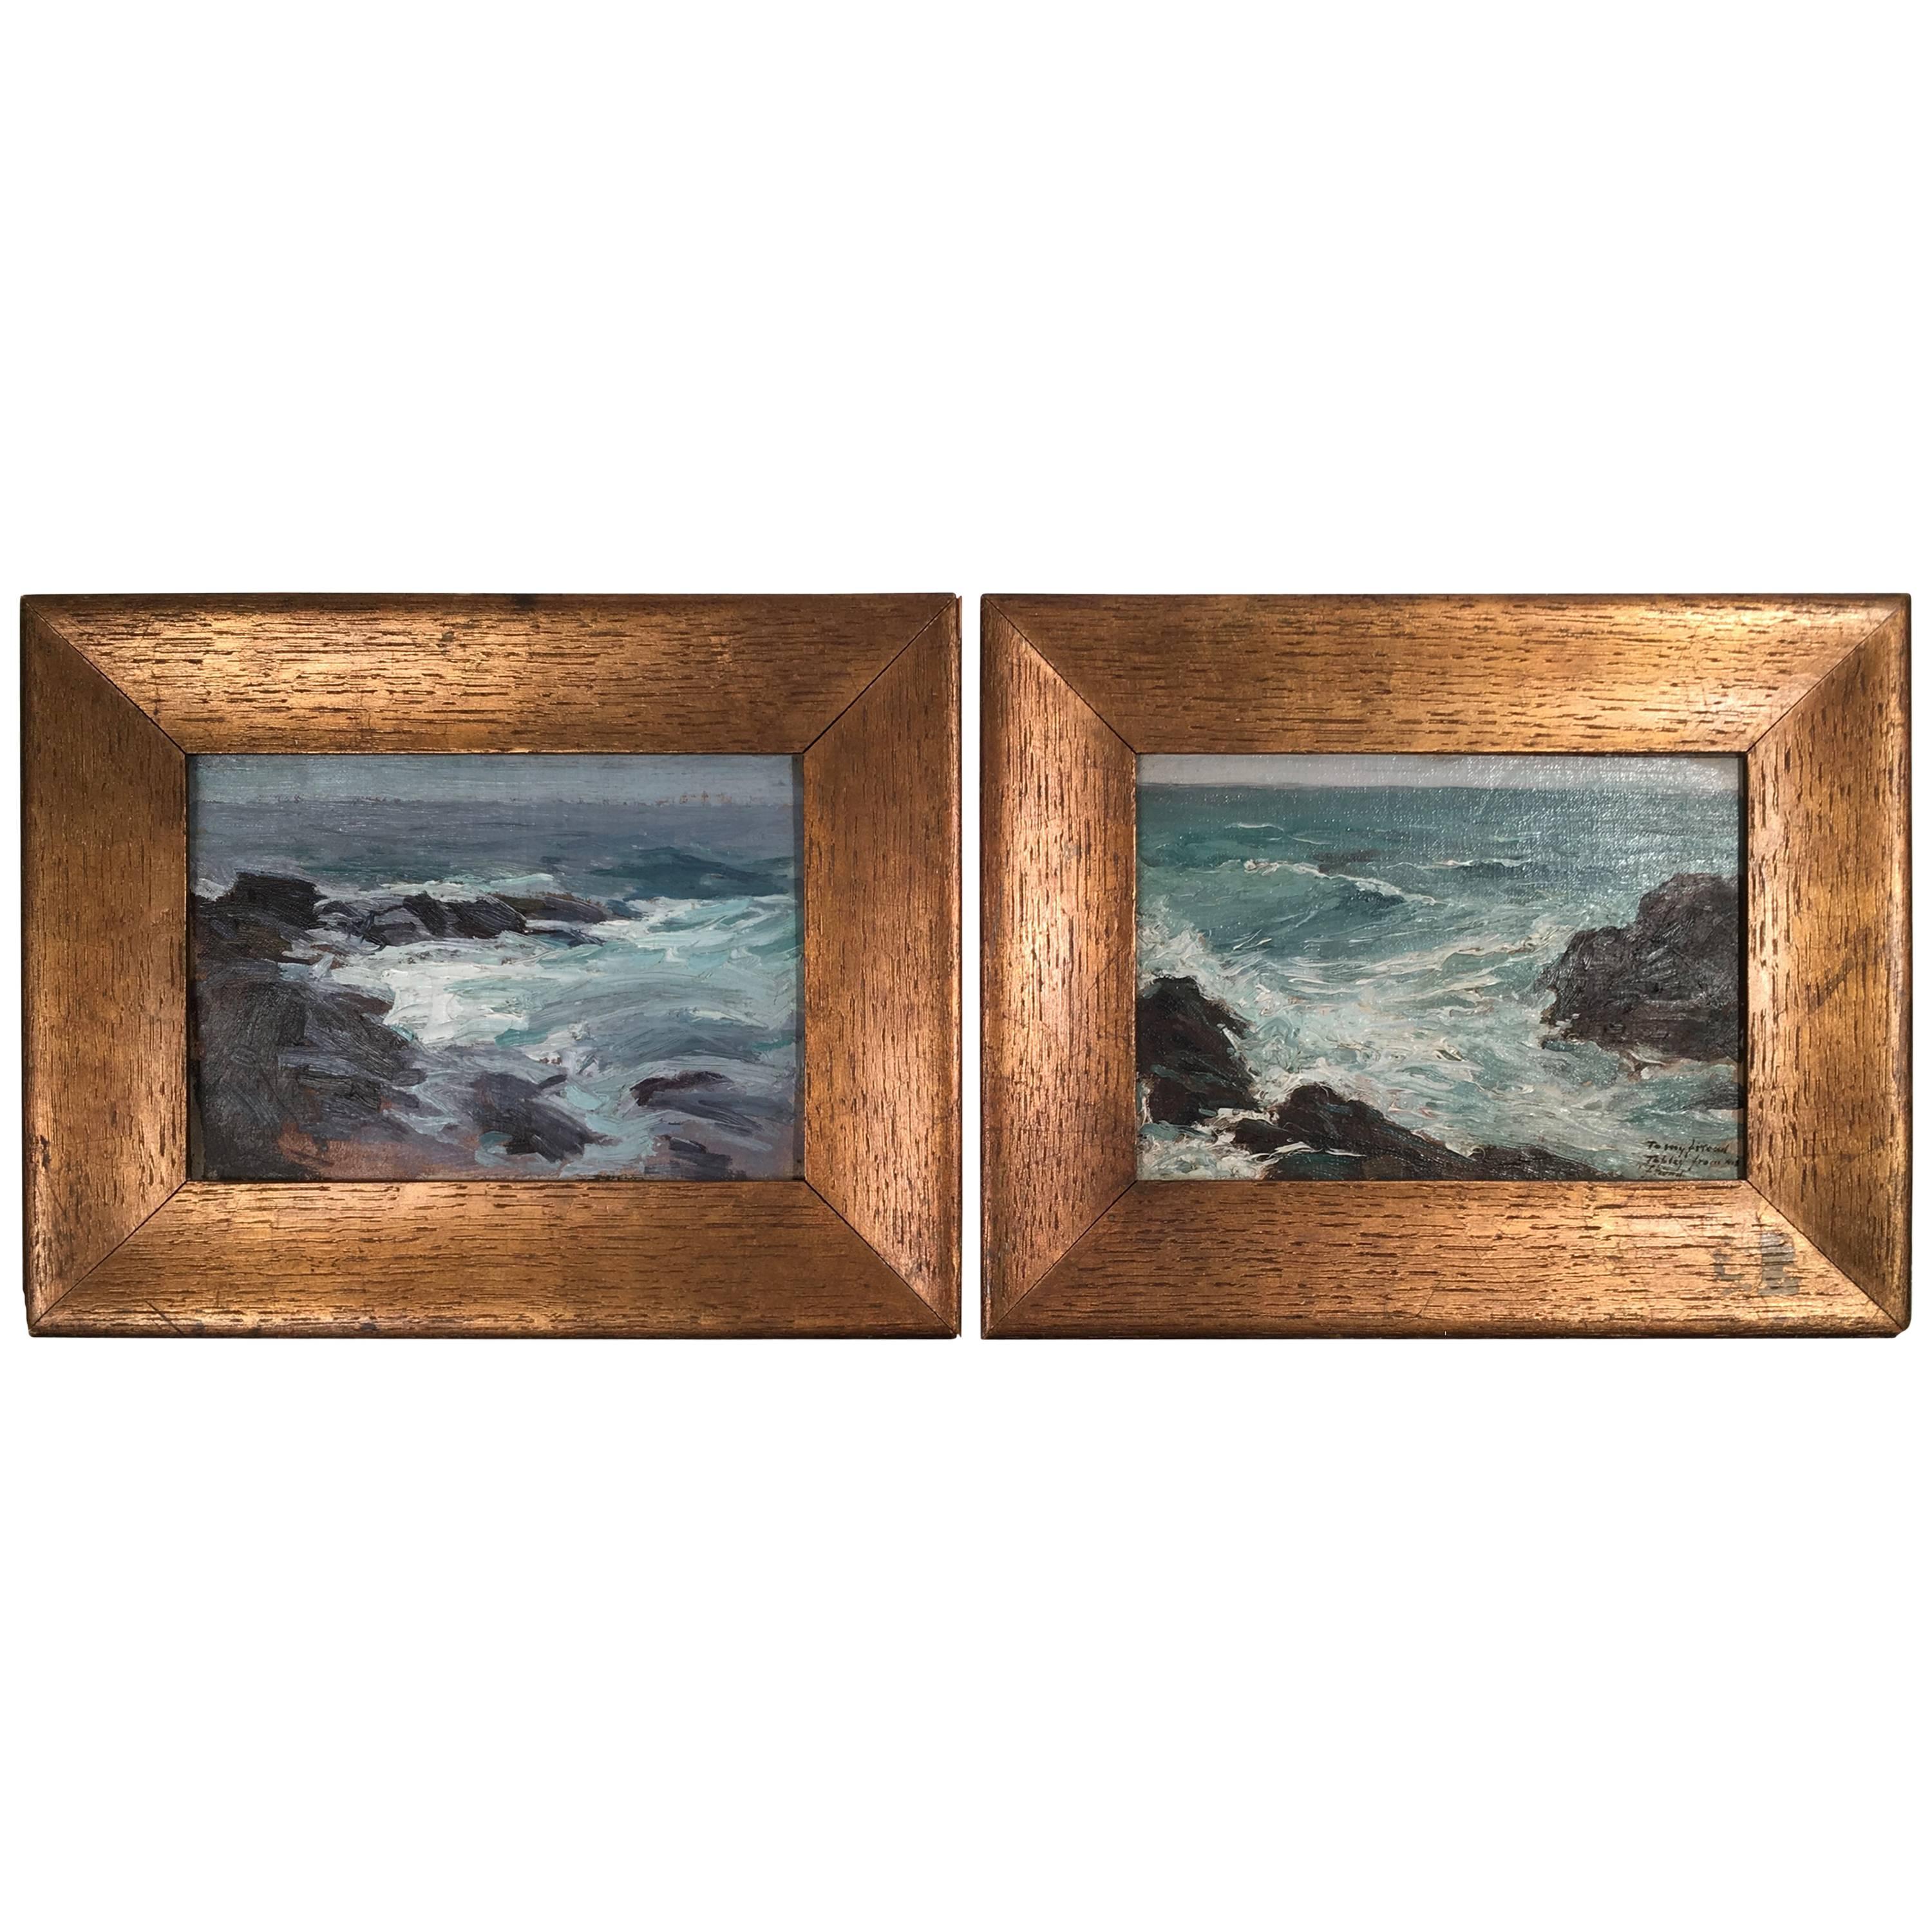 Pair of Small Seascape Paintings in the Manner of Edward Potthast